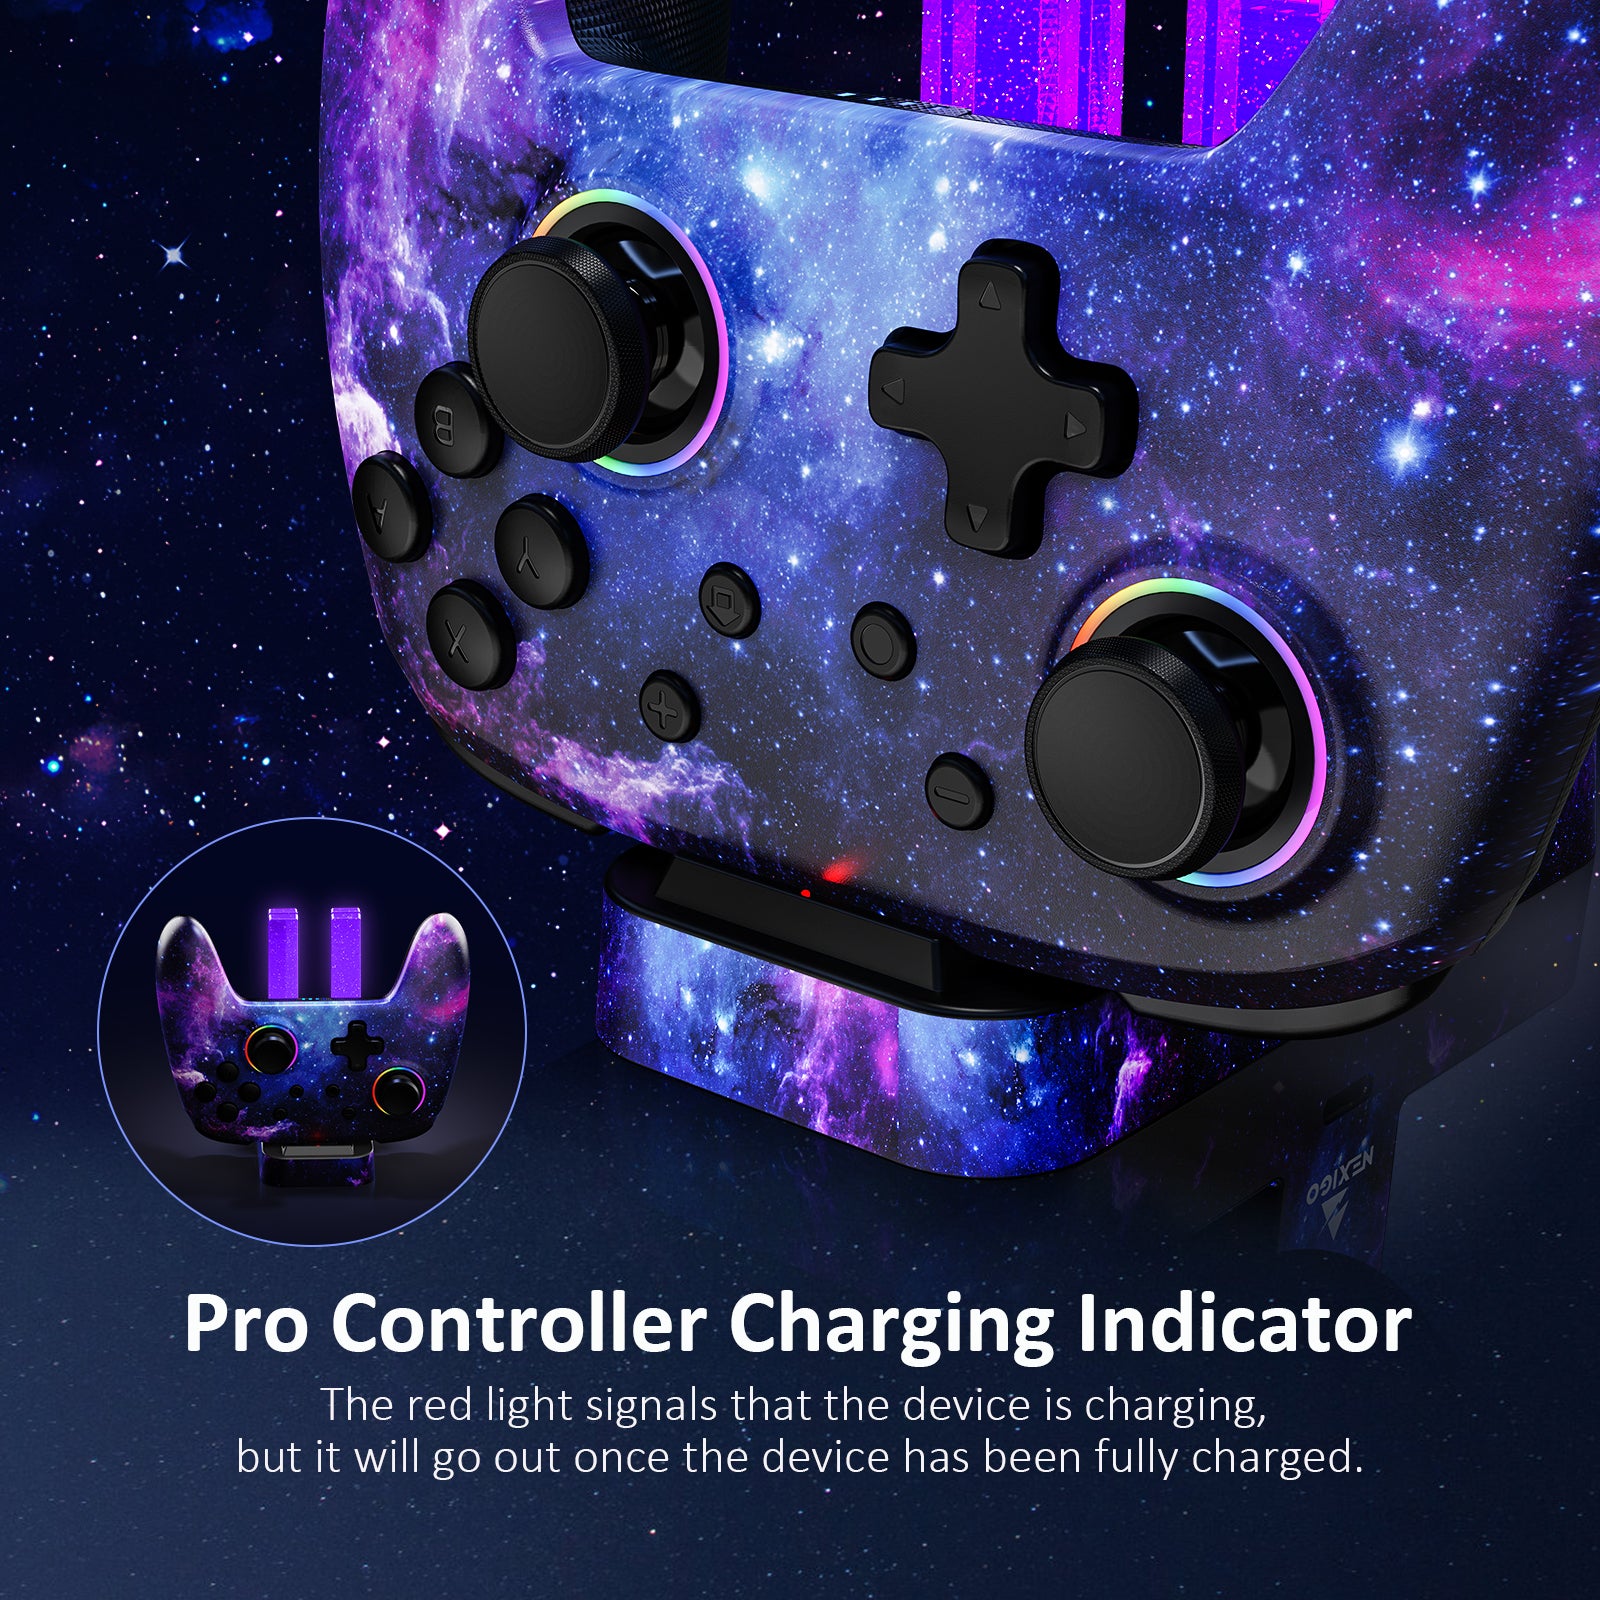 The NexiGo charging dock can charge the Pro Controller.